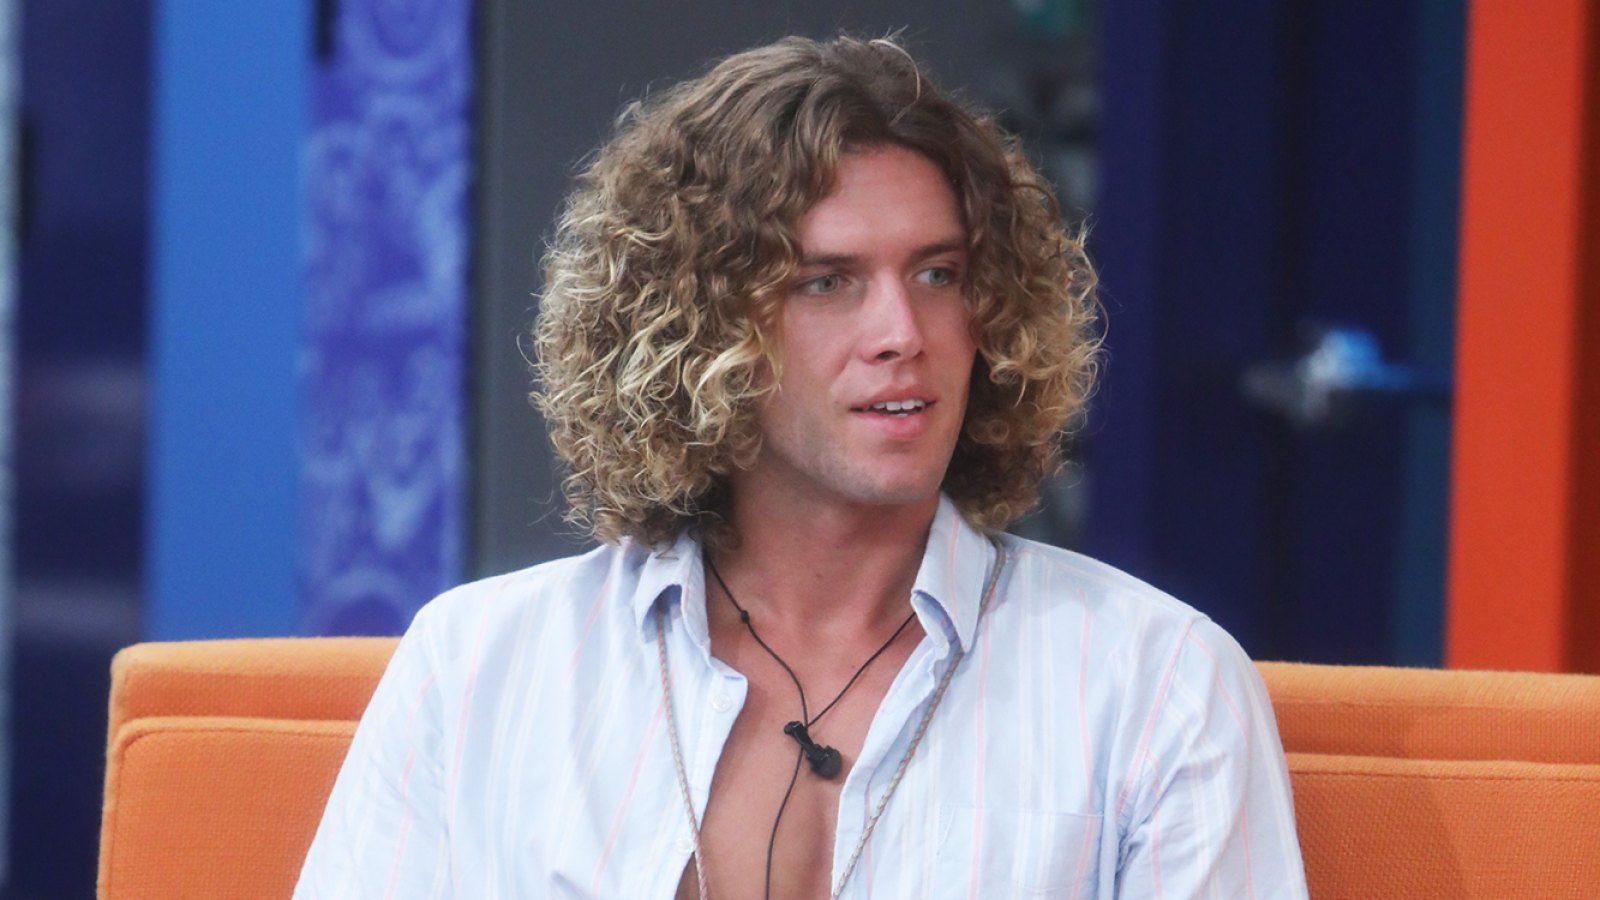 ‘Big Brother’ Runner-Up Tyler Crispen Reveals the Two People He’s ’Shocked’ Didn’t Vote for Him to Win